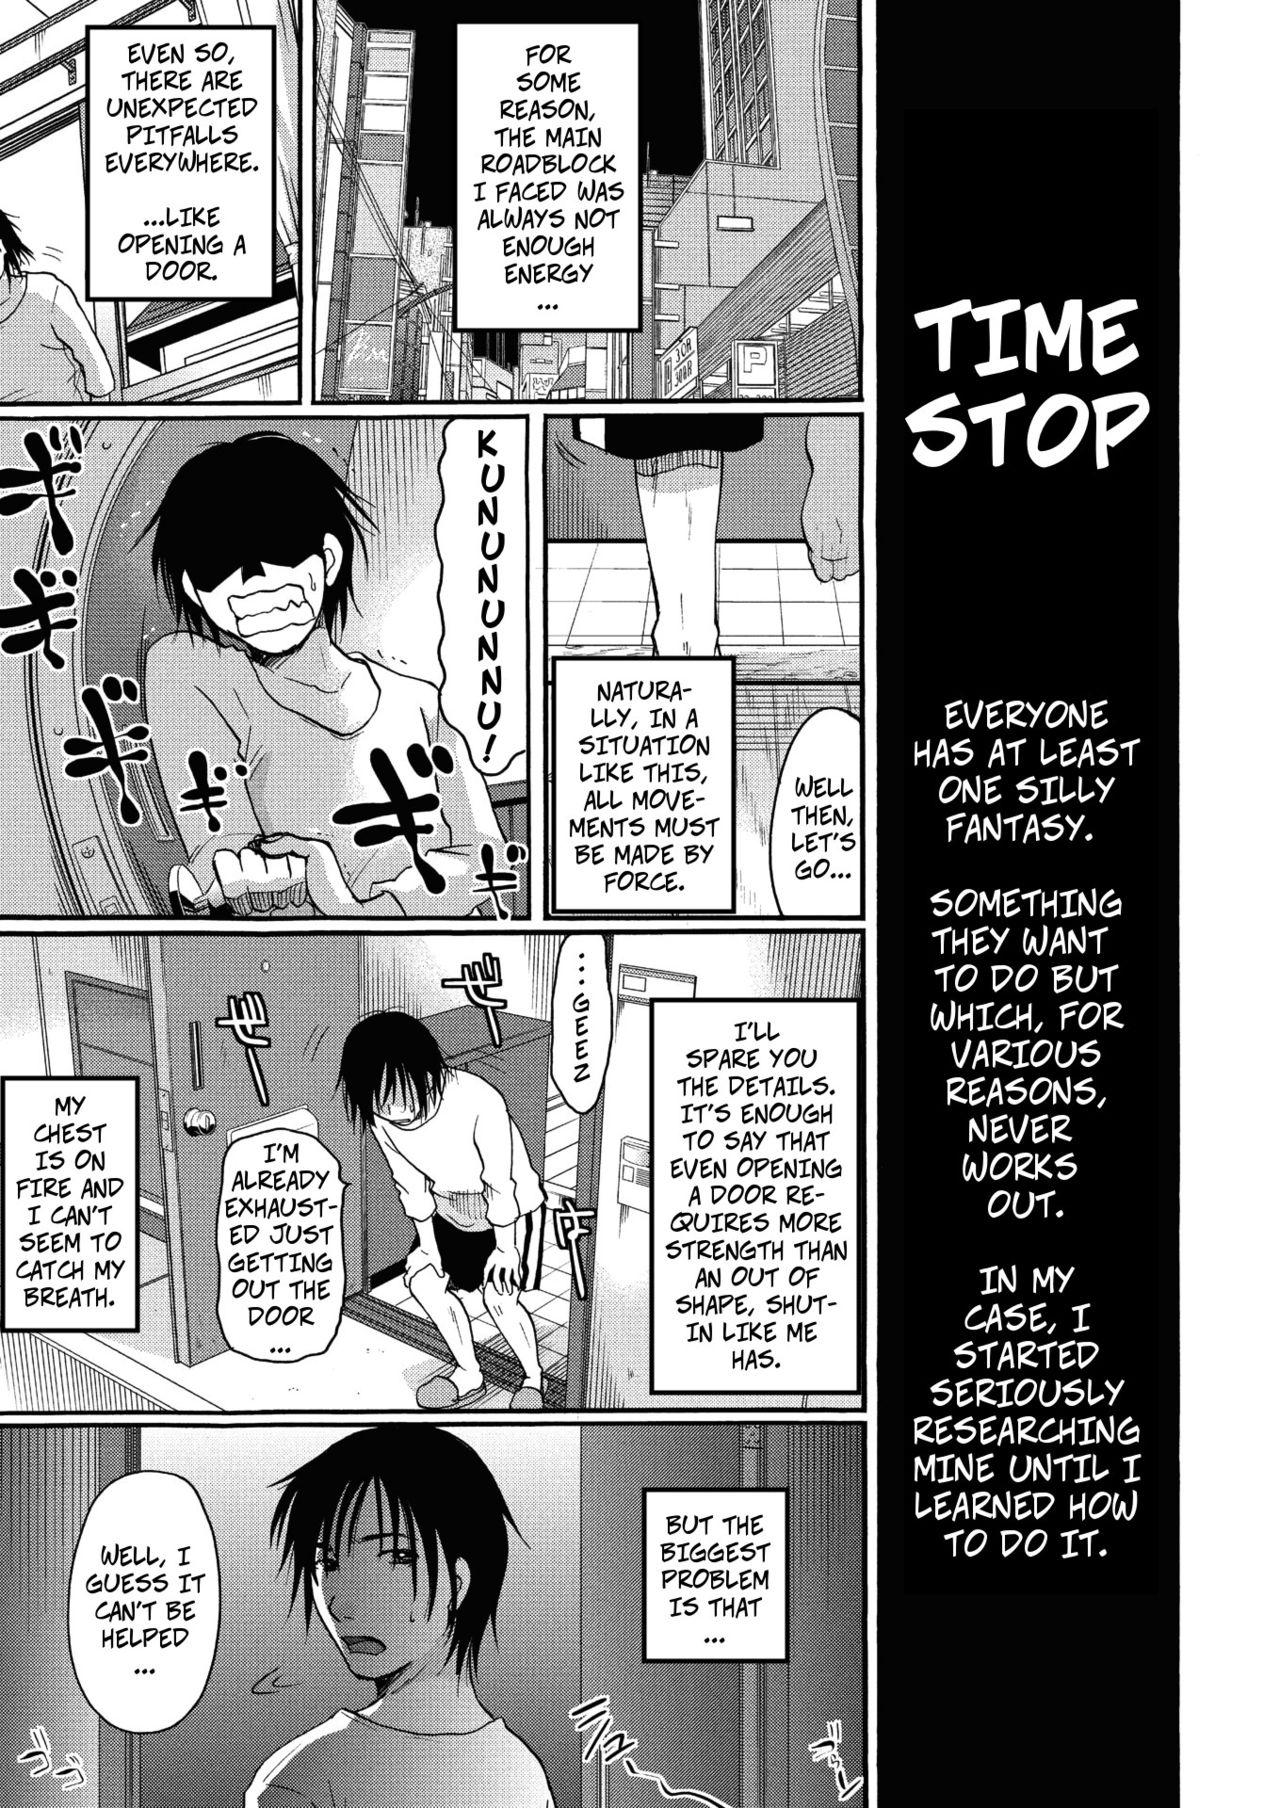 Slapping How To Stop Time Rebolando - Page 3